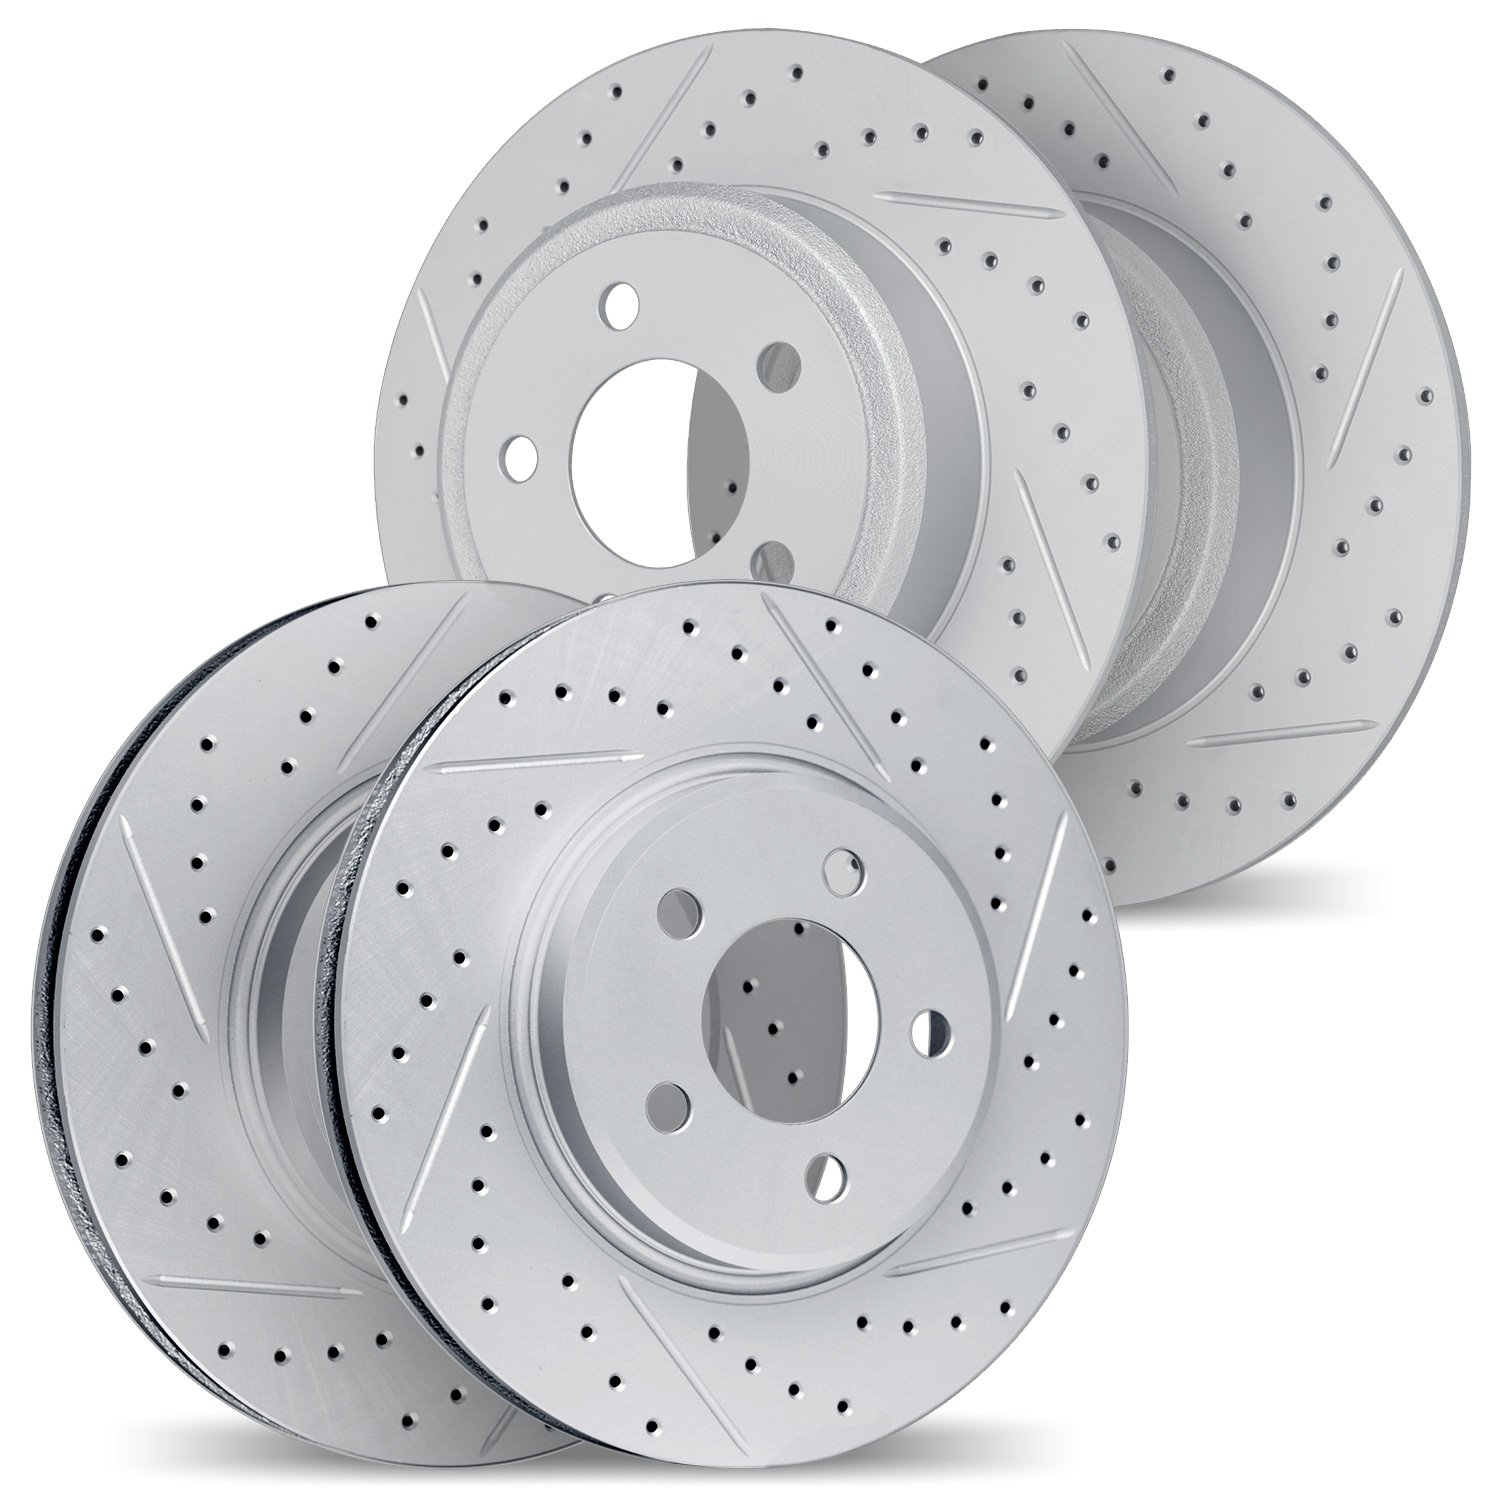 2004-03068 Geoperformance Drilled/Slotted Brake Rotors, 2012-2016 Kia/Hyundai/Genesis, Position: Front and Rear